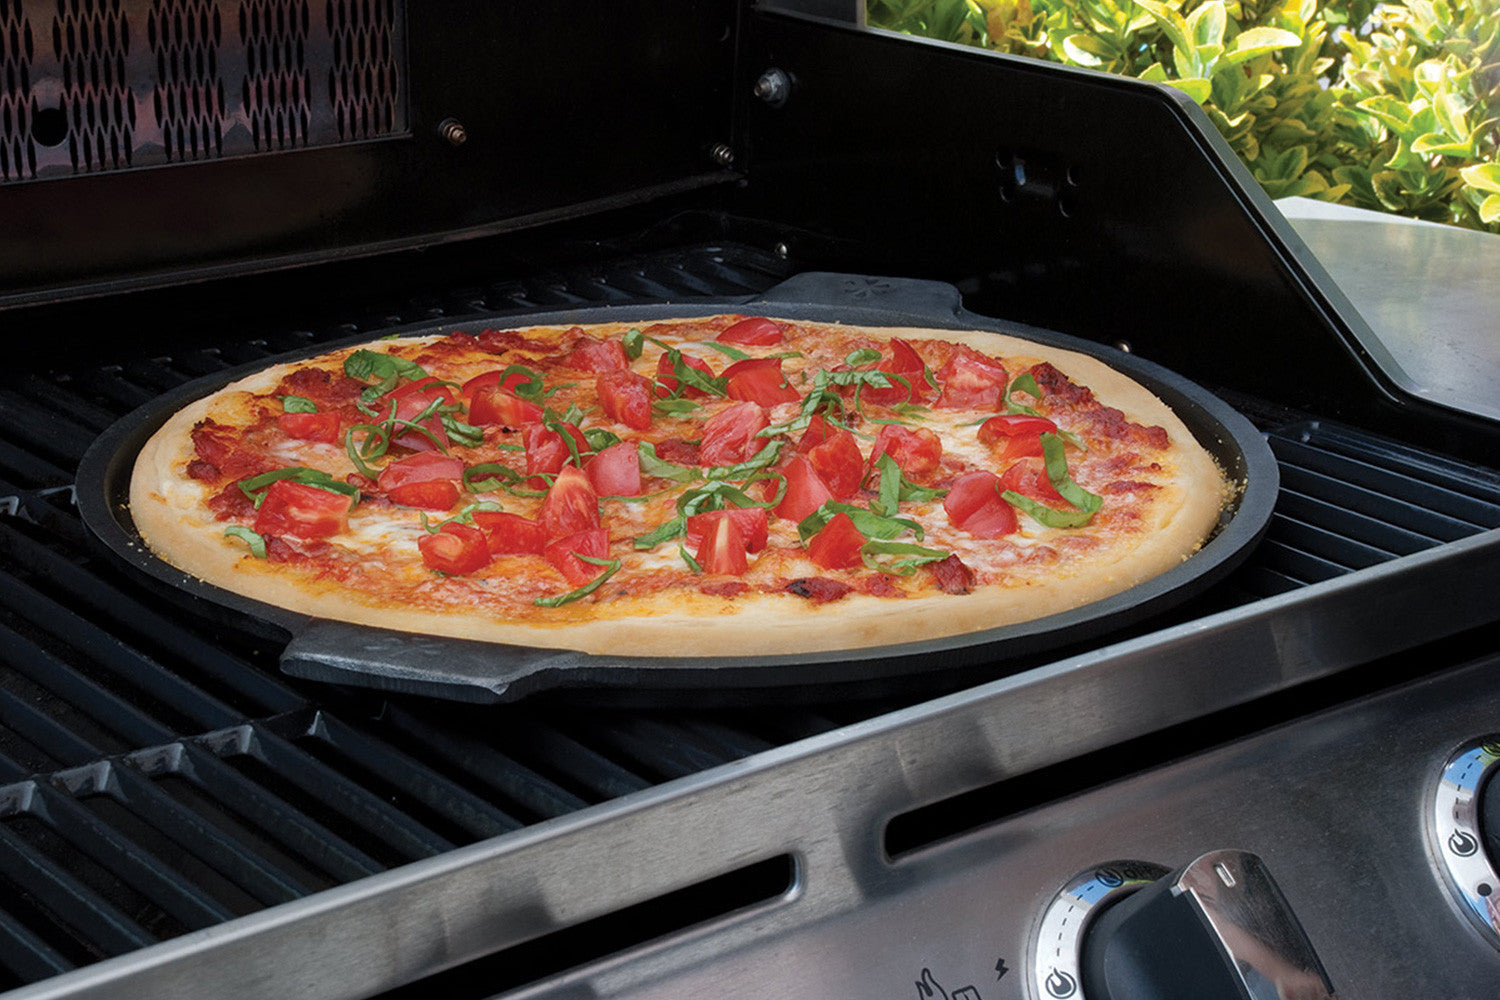 Grilling Pizza on a 14" Round Cast Iron Pizza Pan with Handles